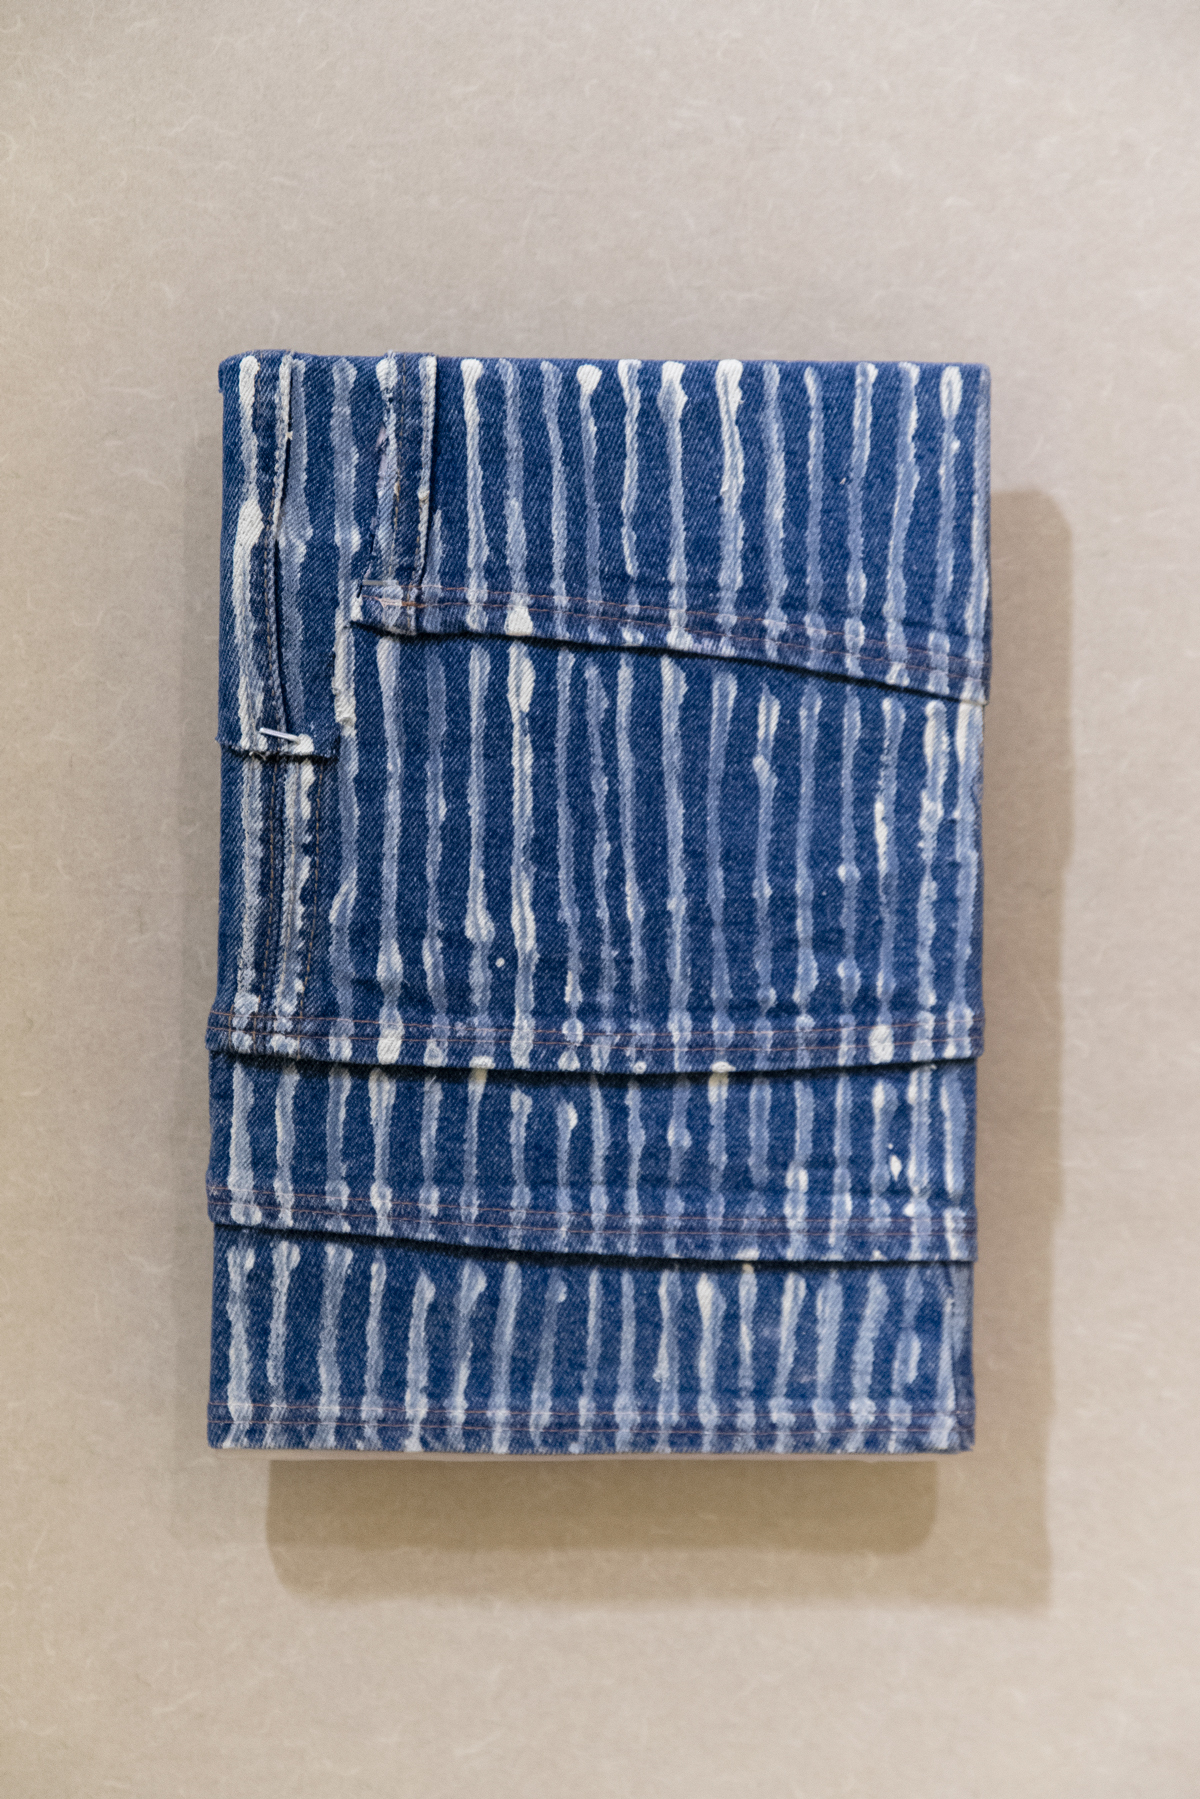 Sophia Domagala, Jeans and Lines, 2022 acrylic, jeans, 28 x 20cm